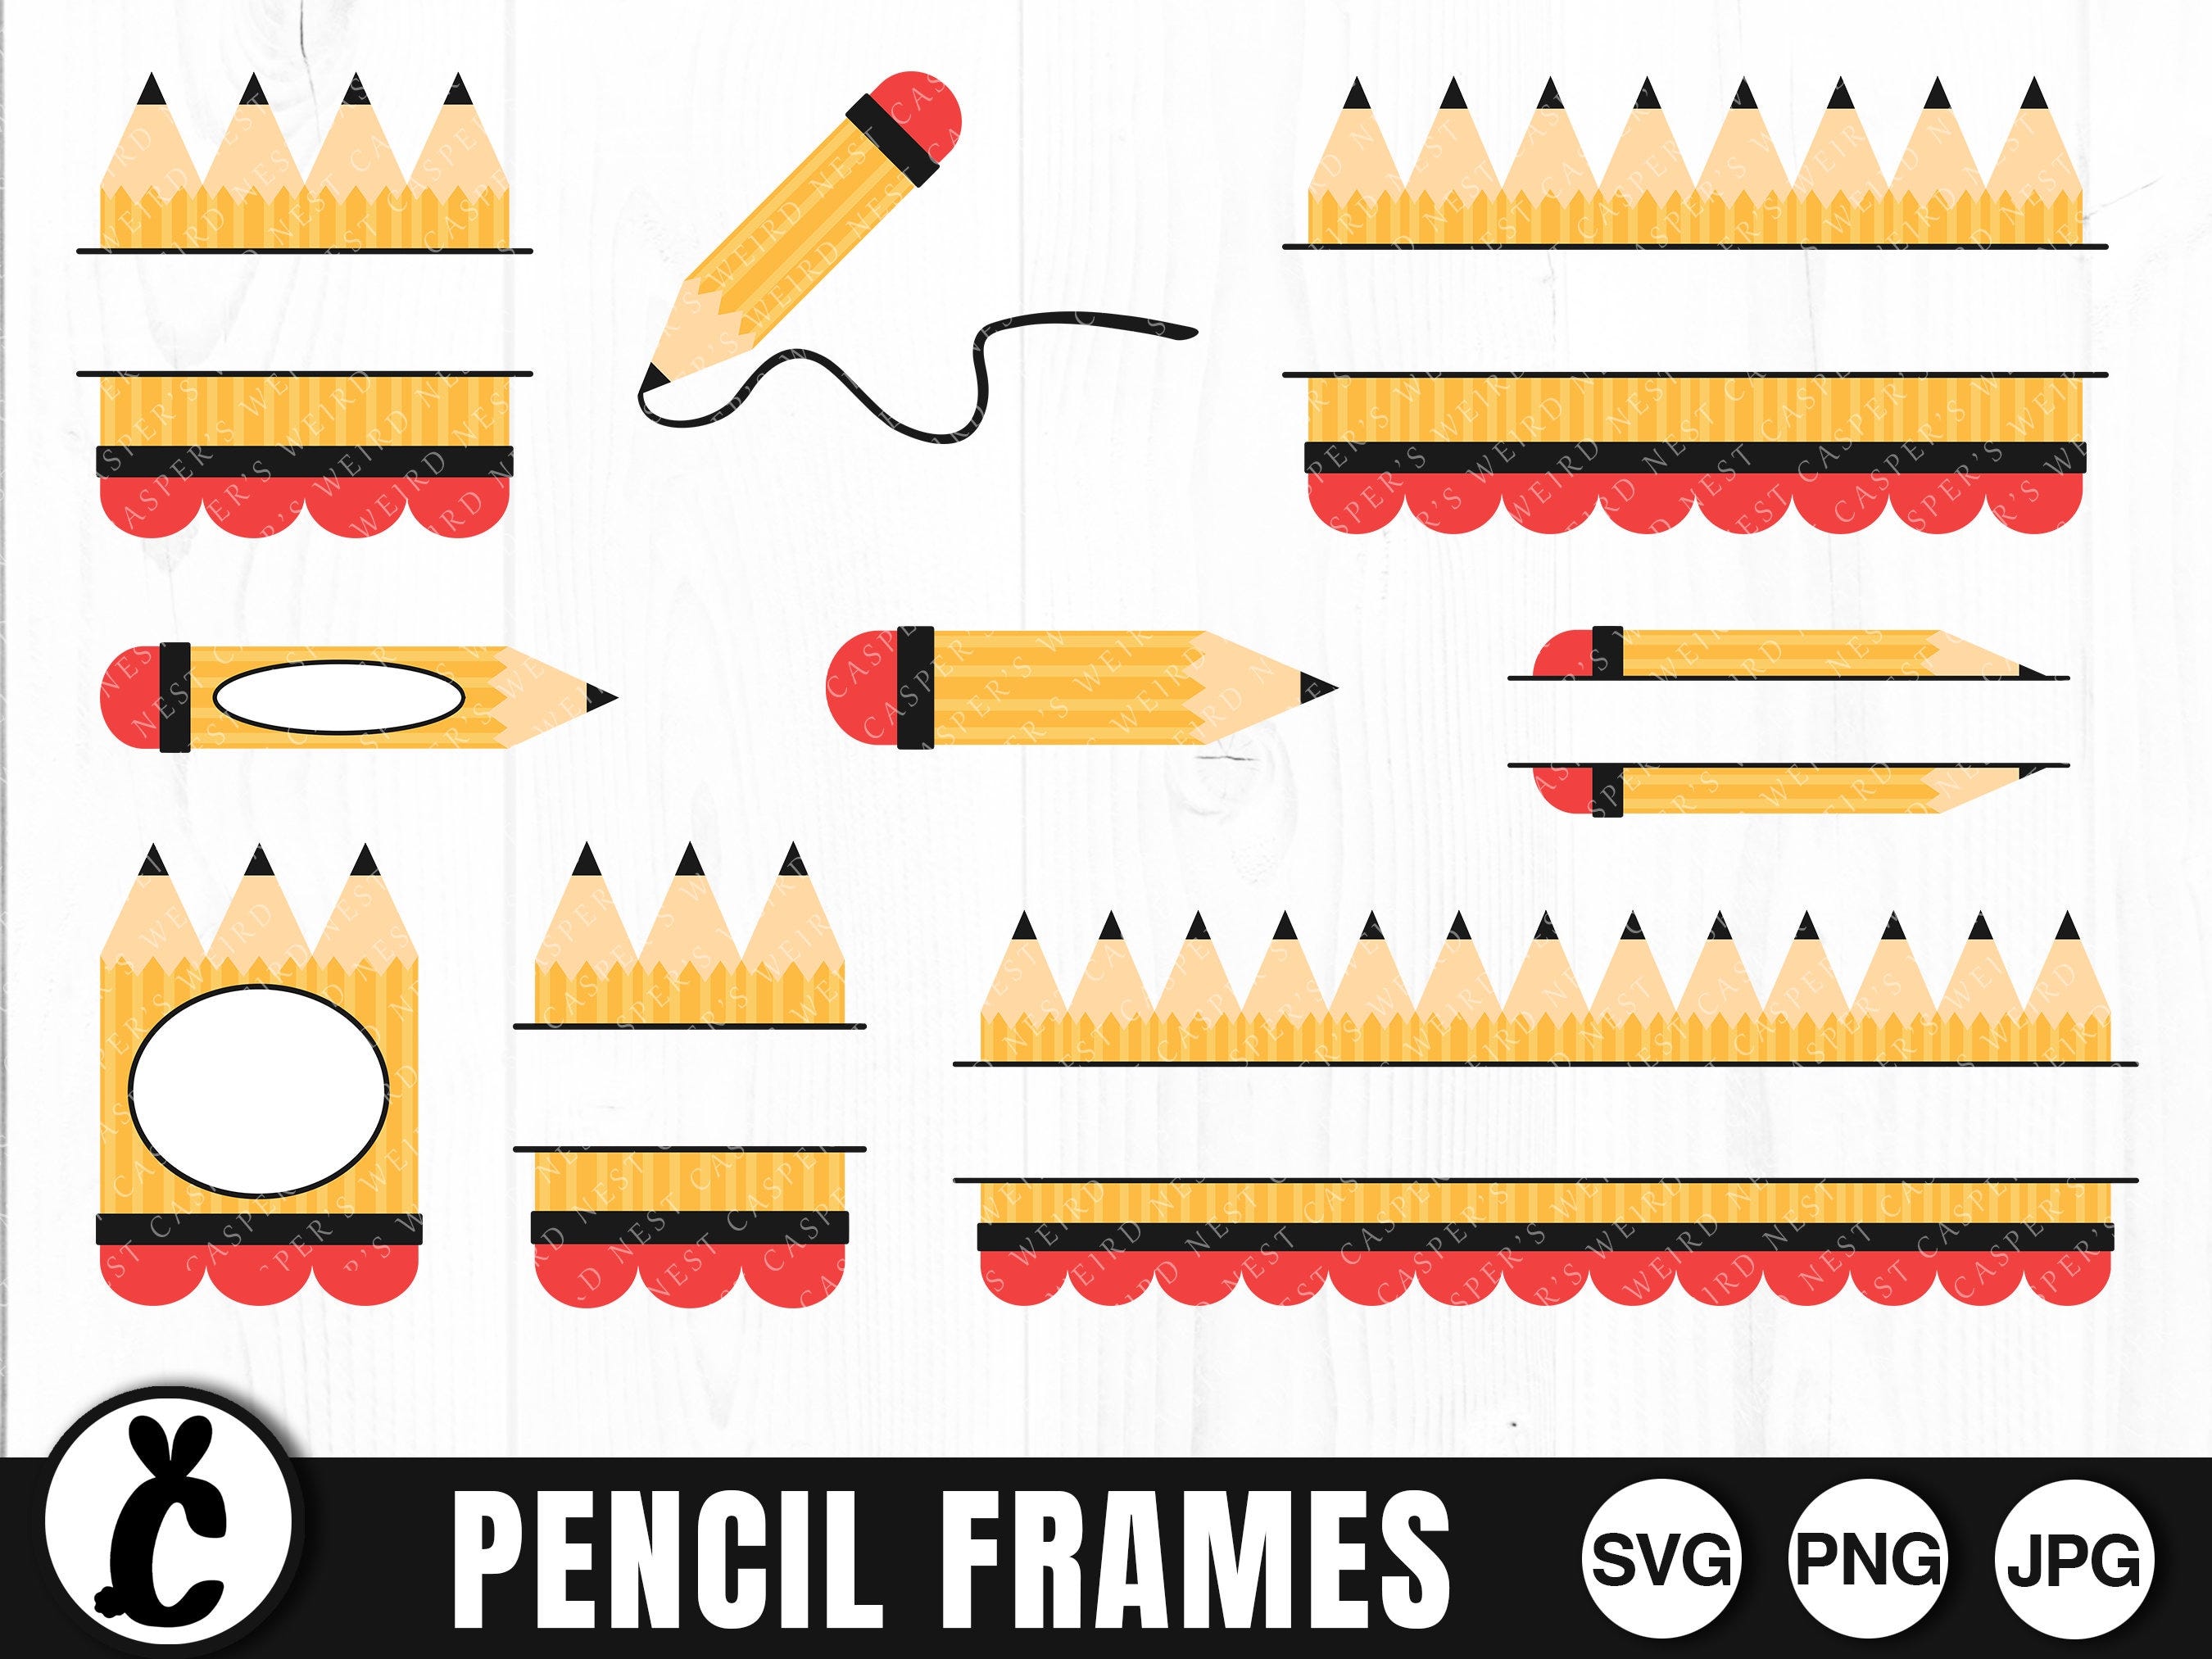 Pencil Frames - SVG, PNG, JPG - Pencil Monograms, Digital Download, Ready to Cut, File for Cricut, Commercial Use, Transparent Background